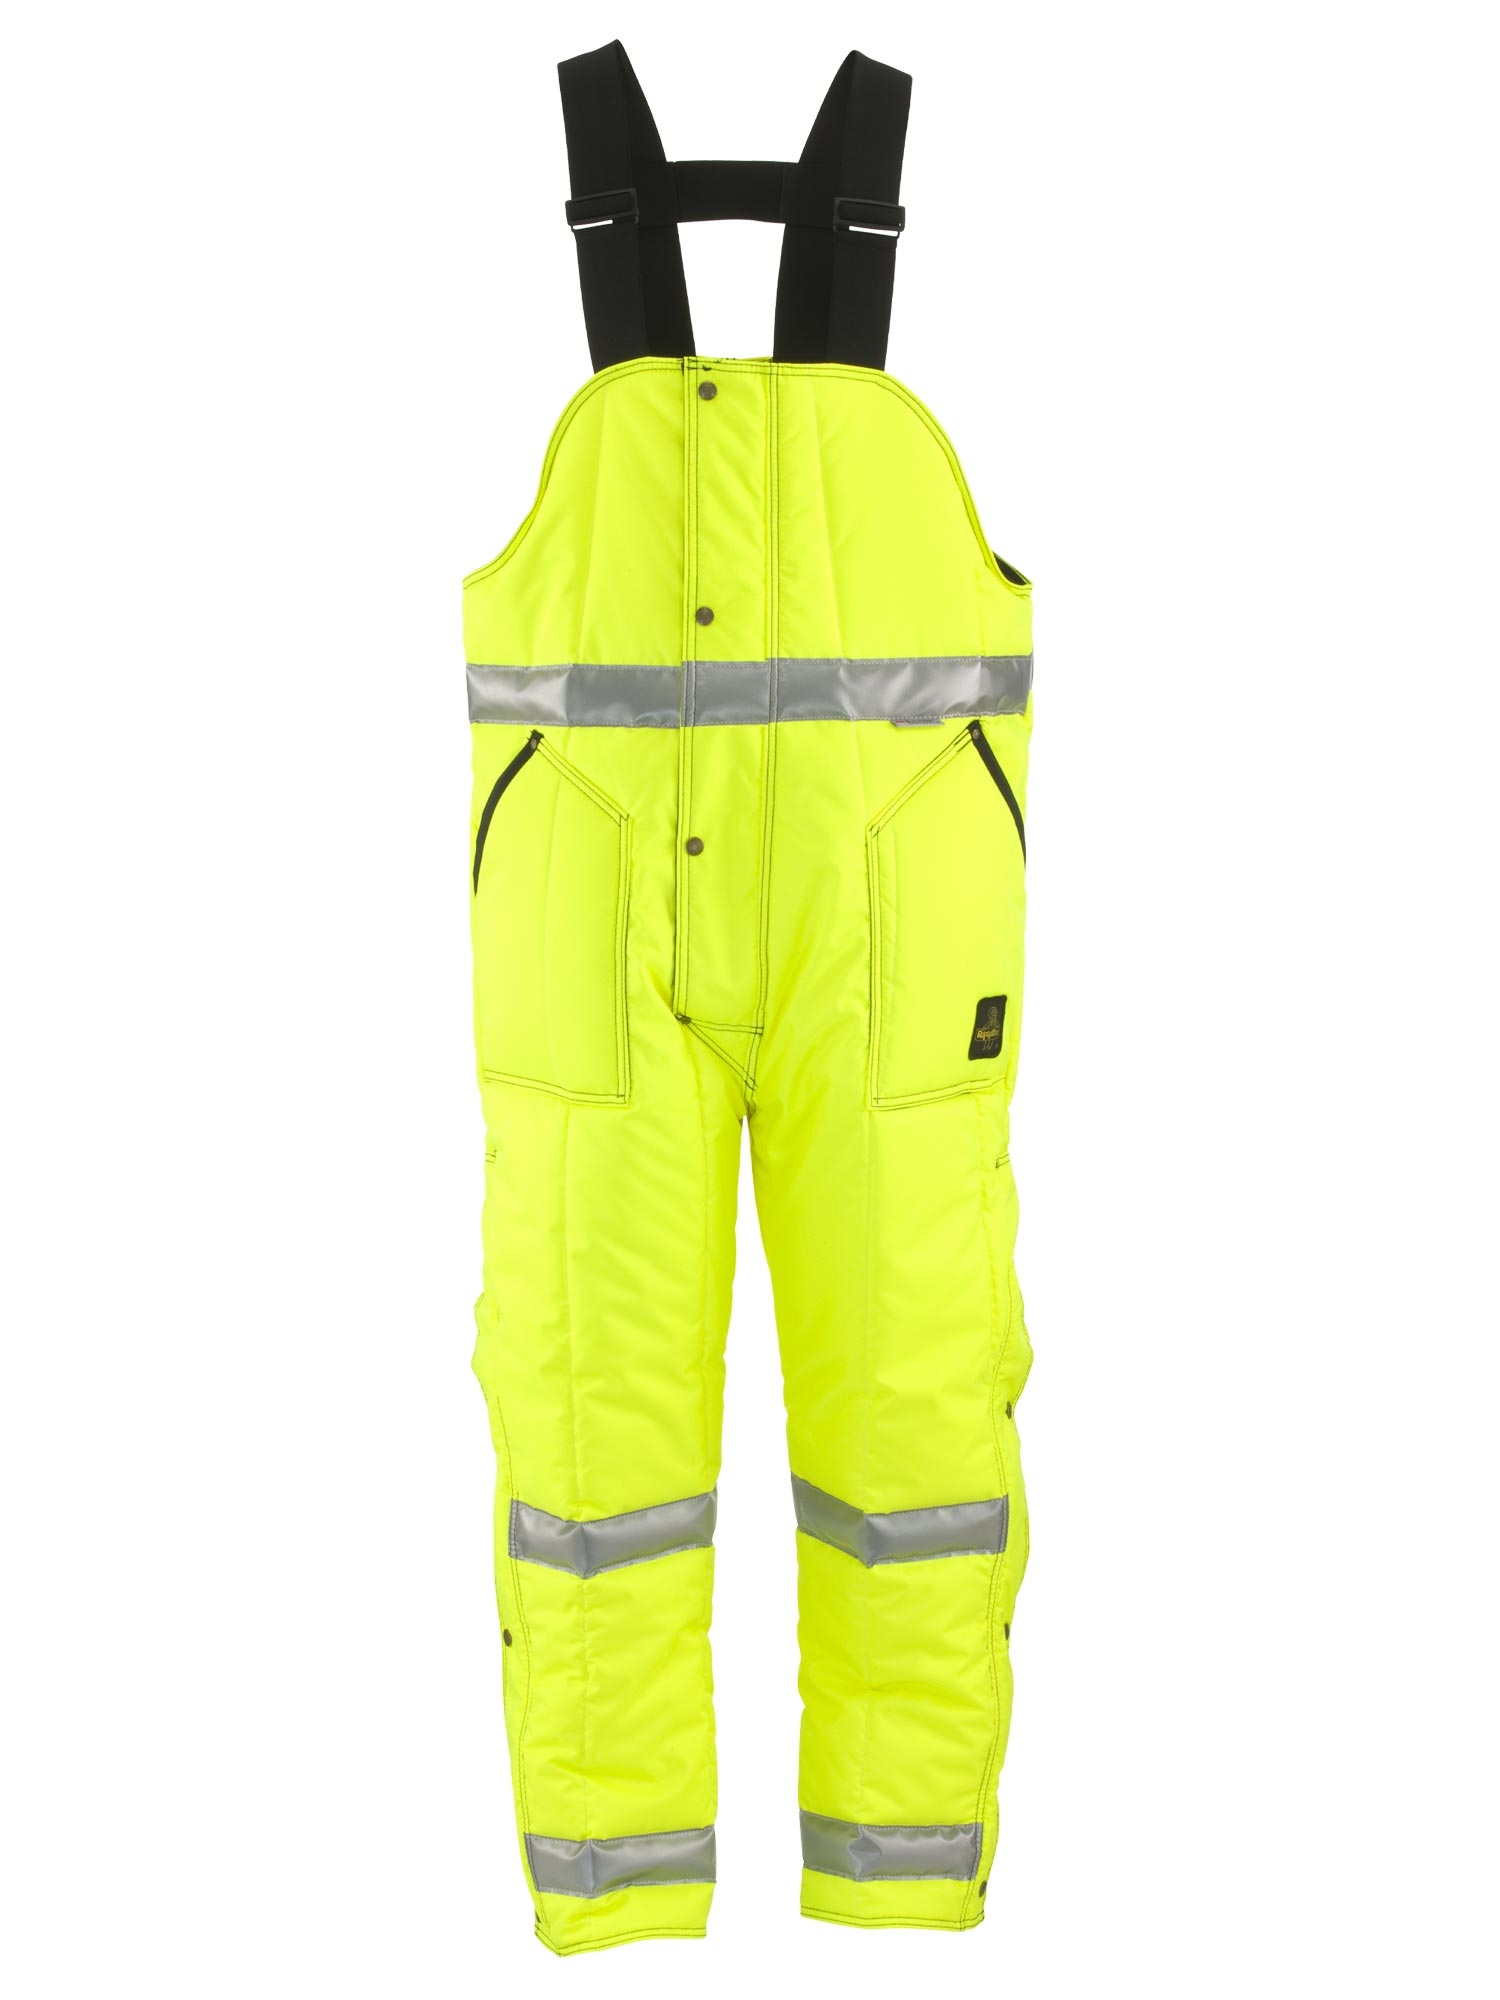 RefrigiWear HiVis Iron-Tuff® Bib Overalls with Reflective Tape | Lime/Silver | Fit: Big & Tall | Ragg Wool/Polyester/Nylon | S